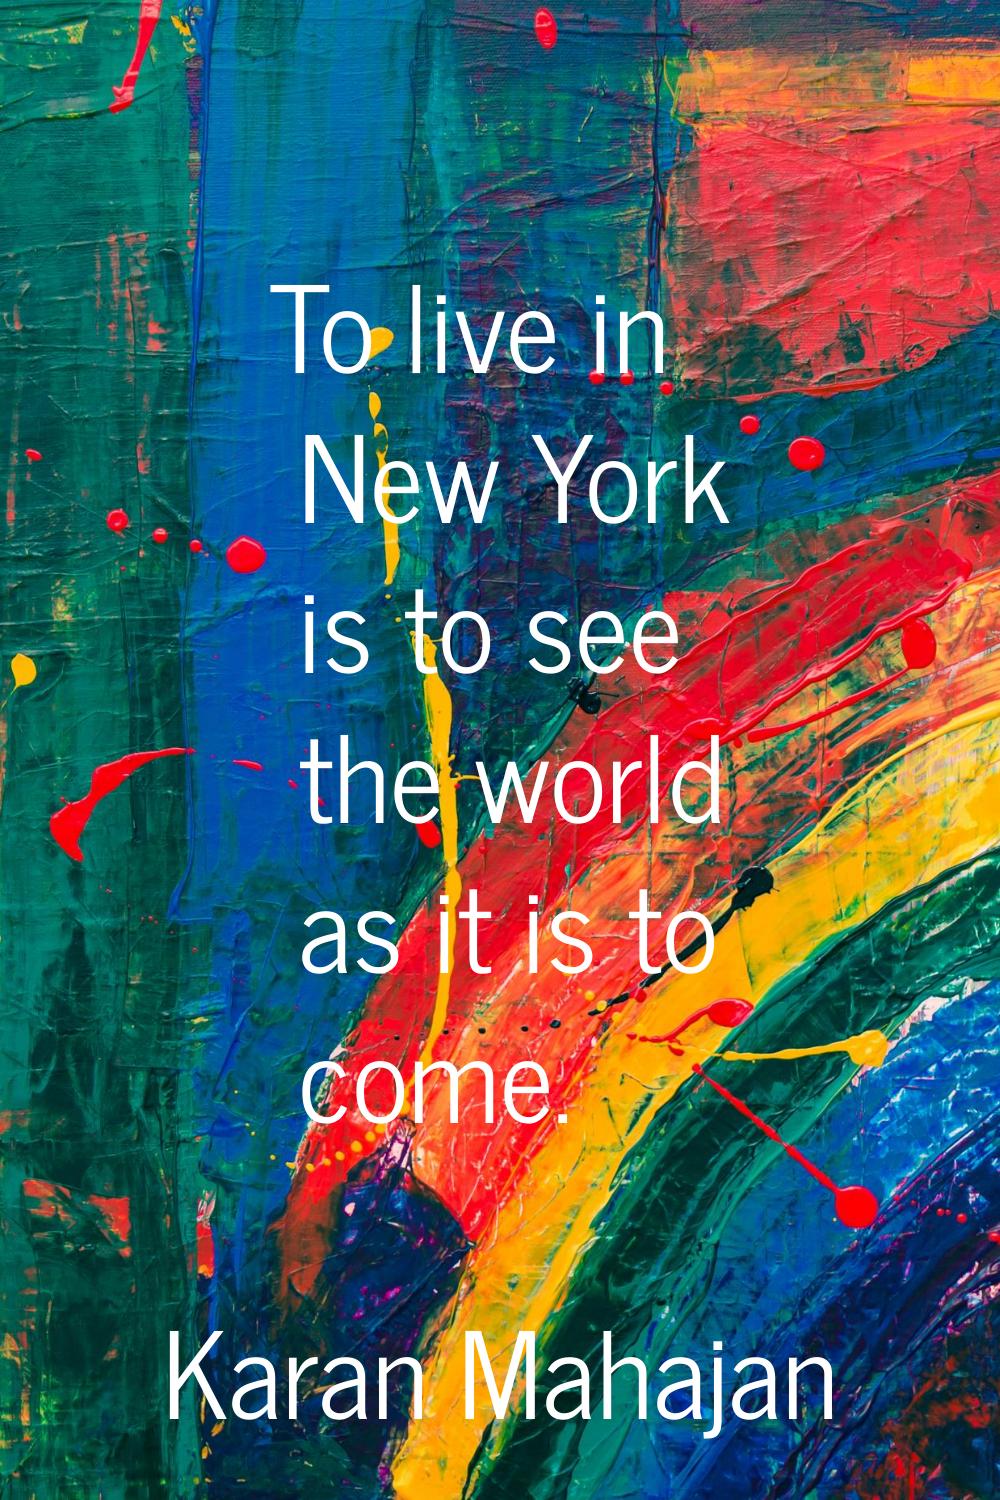 To live in New York is to see the world as it is to come.